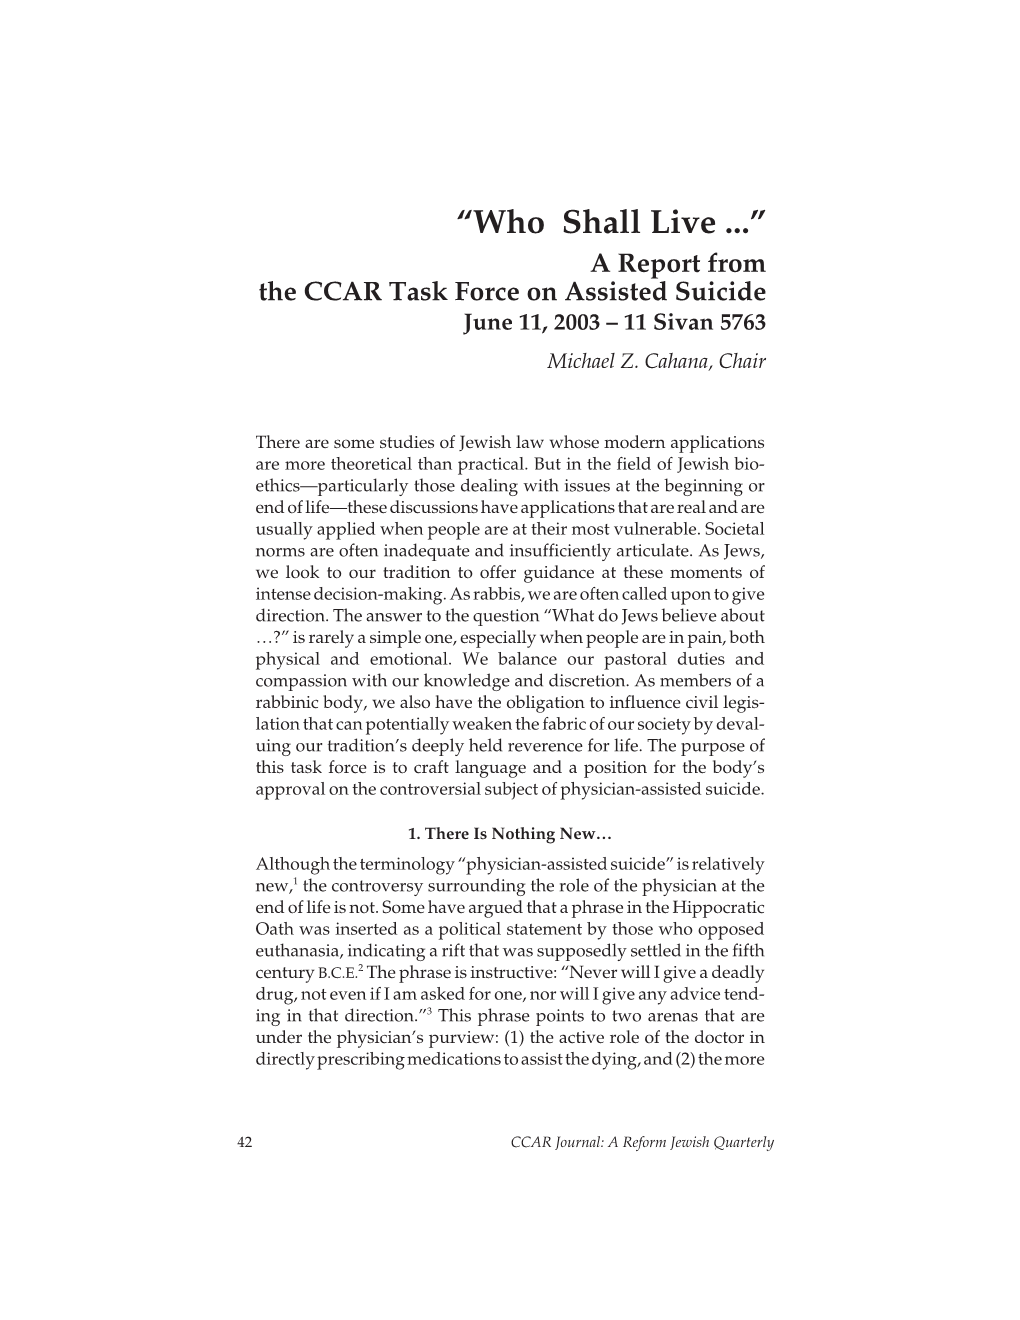 “Who Shall Live ...” a Report from the CCAR Task Force on Assisted Suicide June 11, 2003 – 11 Sivan 5763 Michael Z